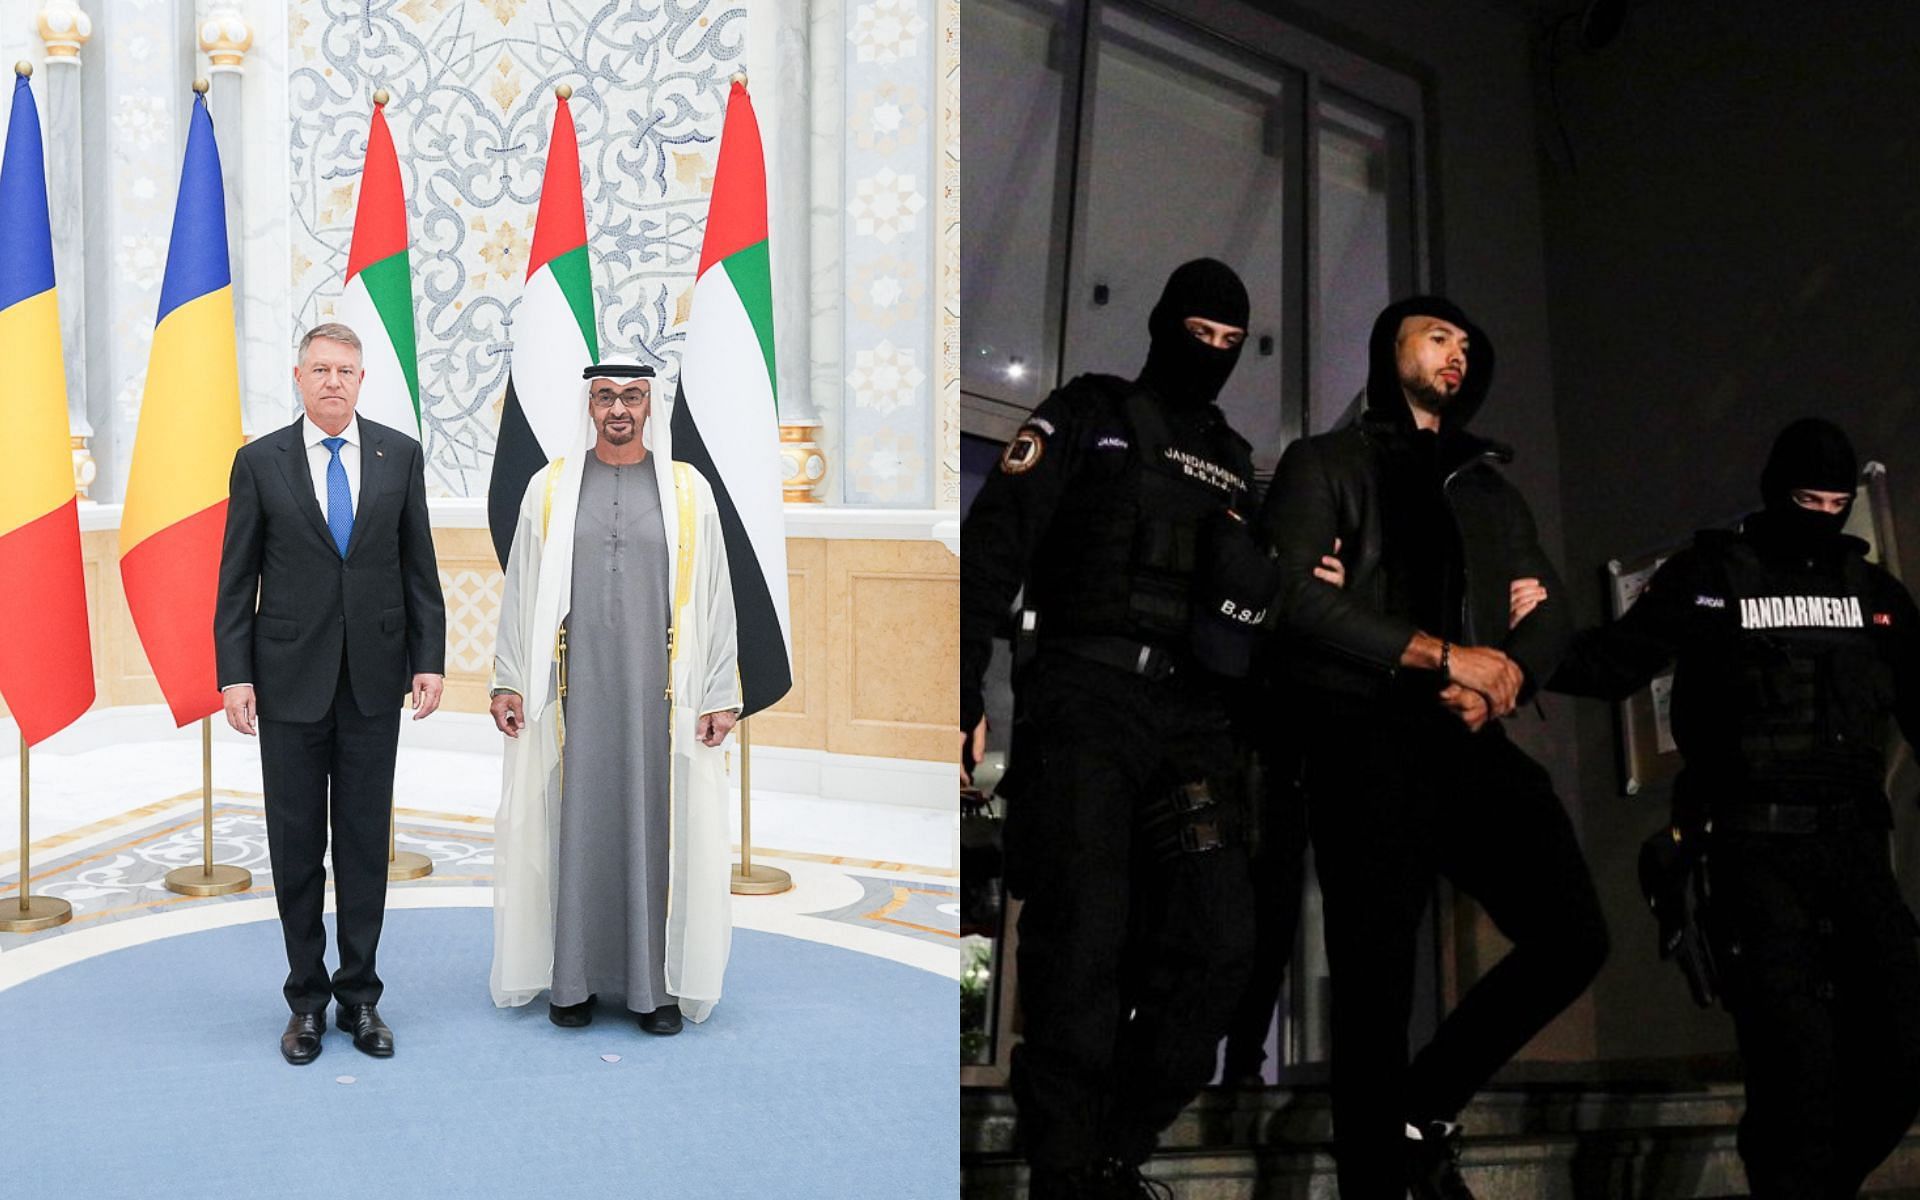 Klaus Iohannis and His Highness Mohamed bin Zayed Al Nahyan (left) and Andrew Tate being arrested (right) (Image credits @KlausIohannis and @TateNews_ on Twitter )